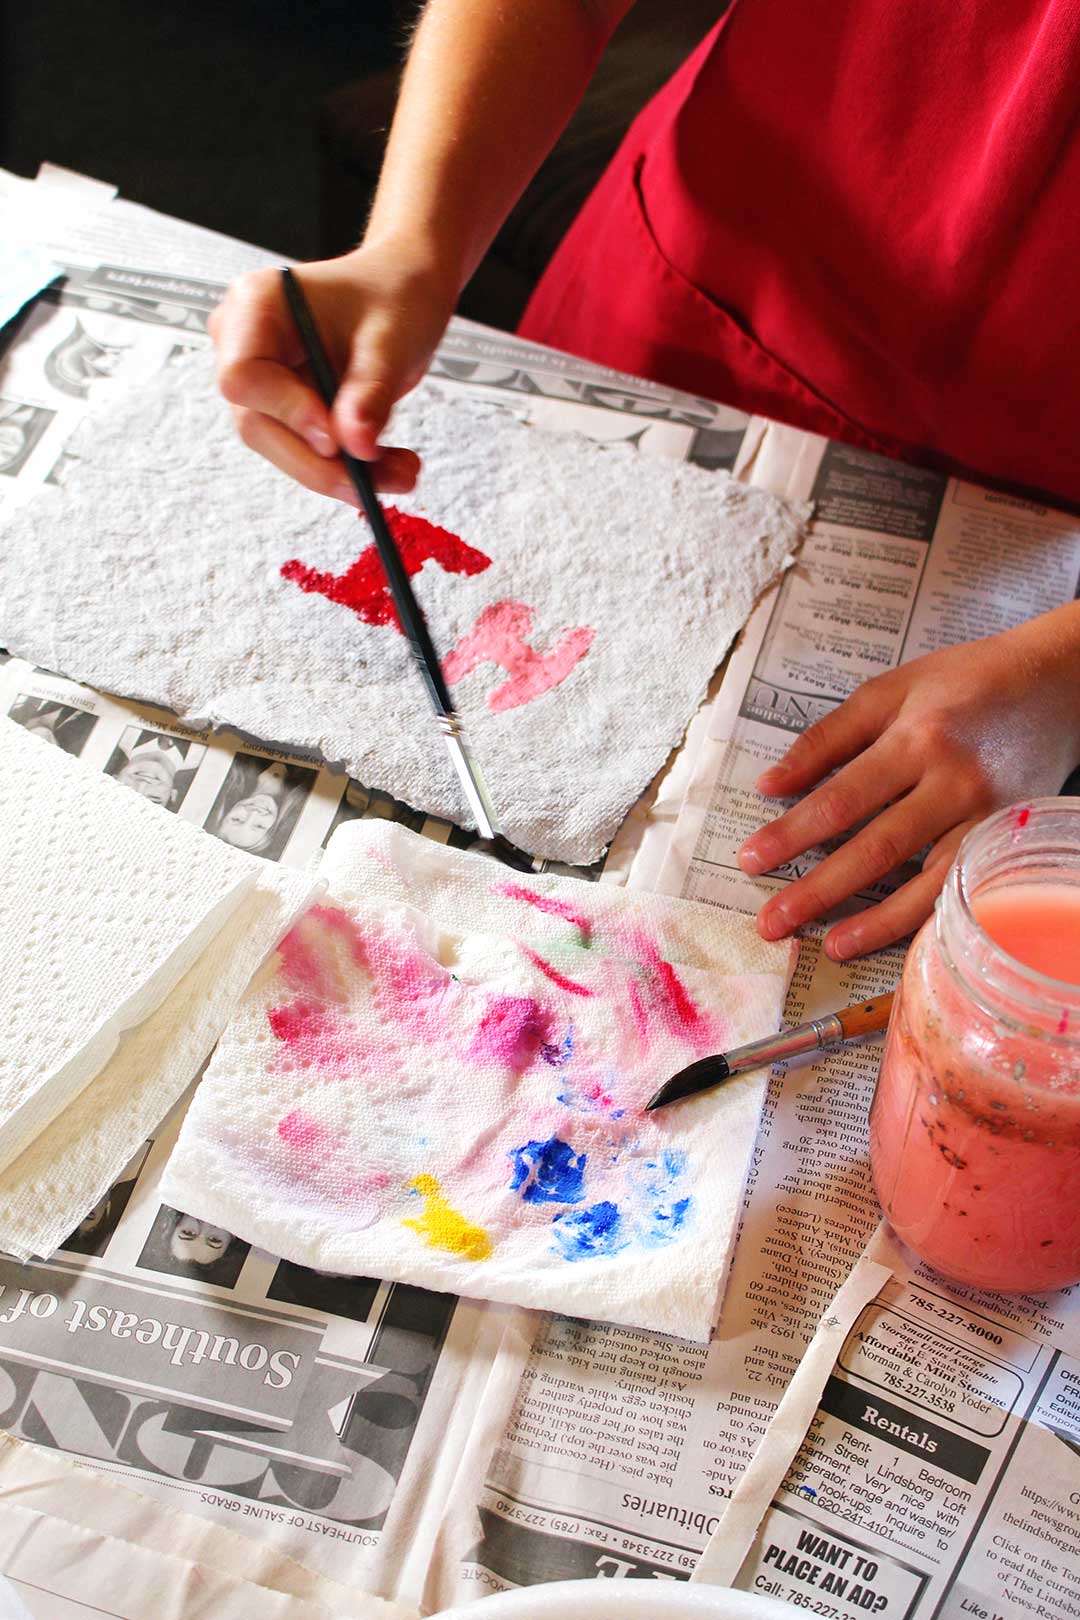 Child in red smock painting on homemade paper, paper towel for blotting and cup for rinsing paintbrushes.